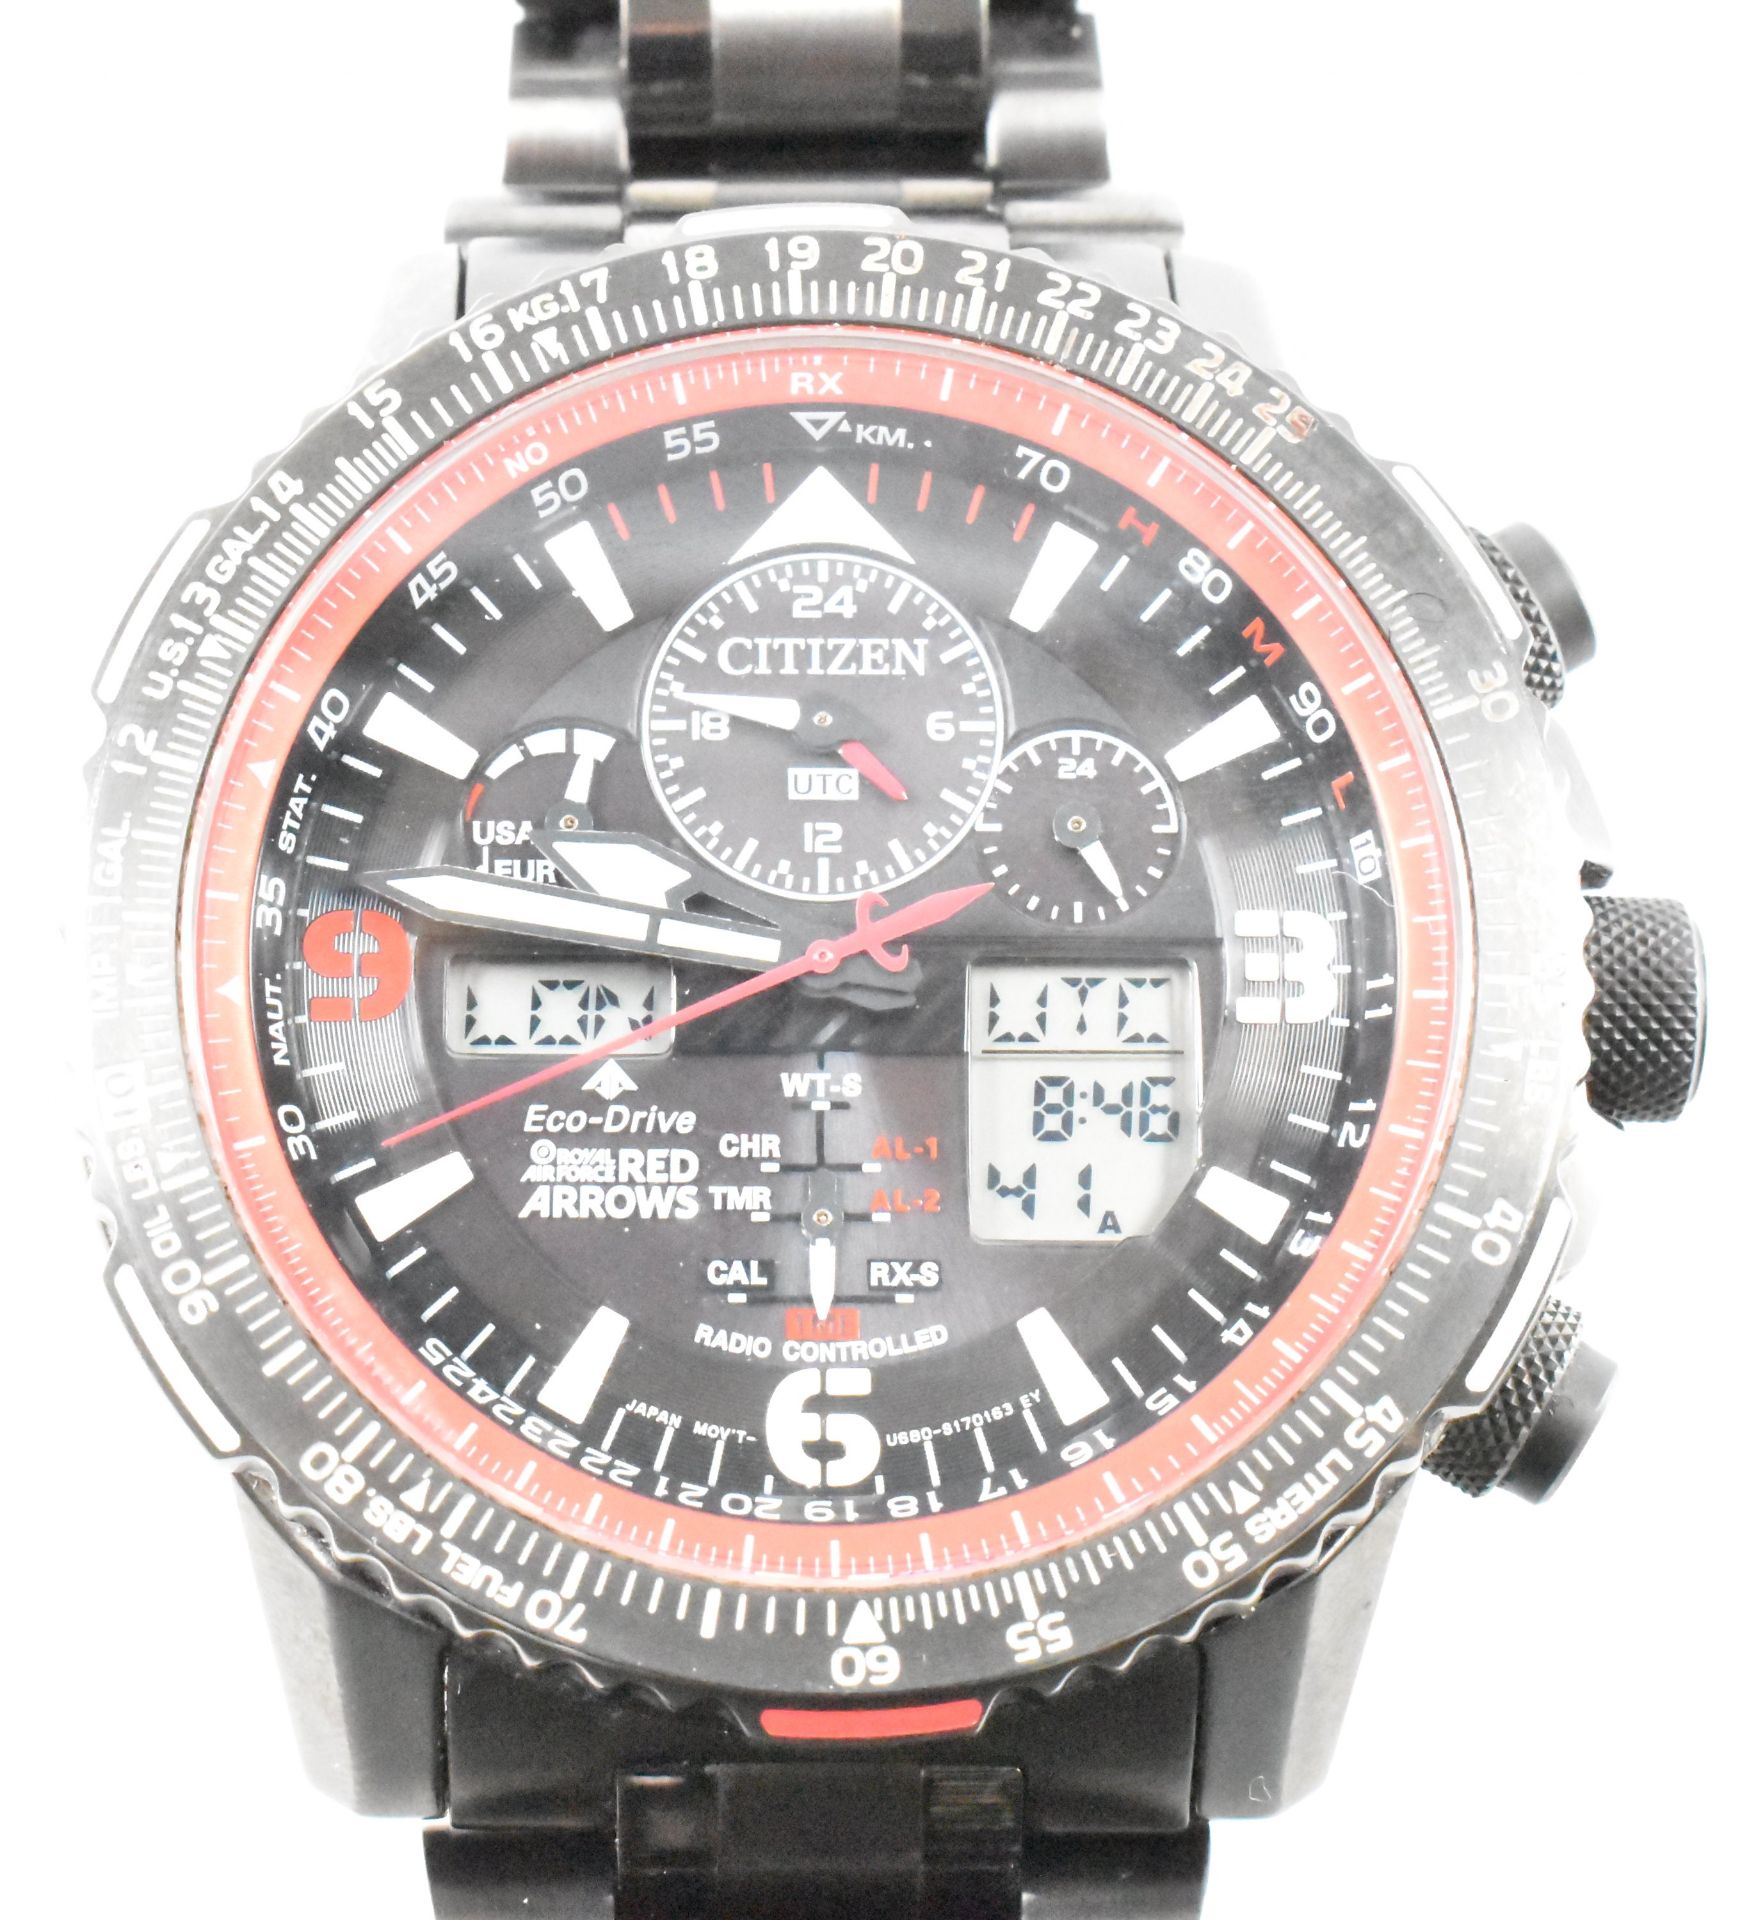 CITIZEN ECO DRIVE LIMITED EDITION RED ARROWS WRISTWATCH - Image 2 of 8